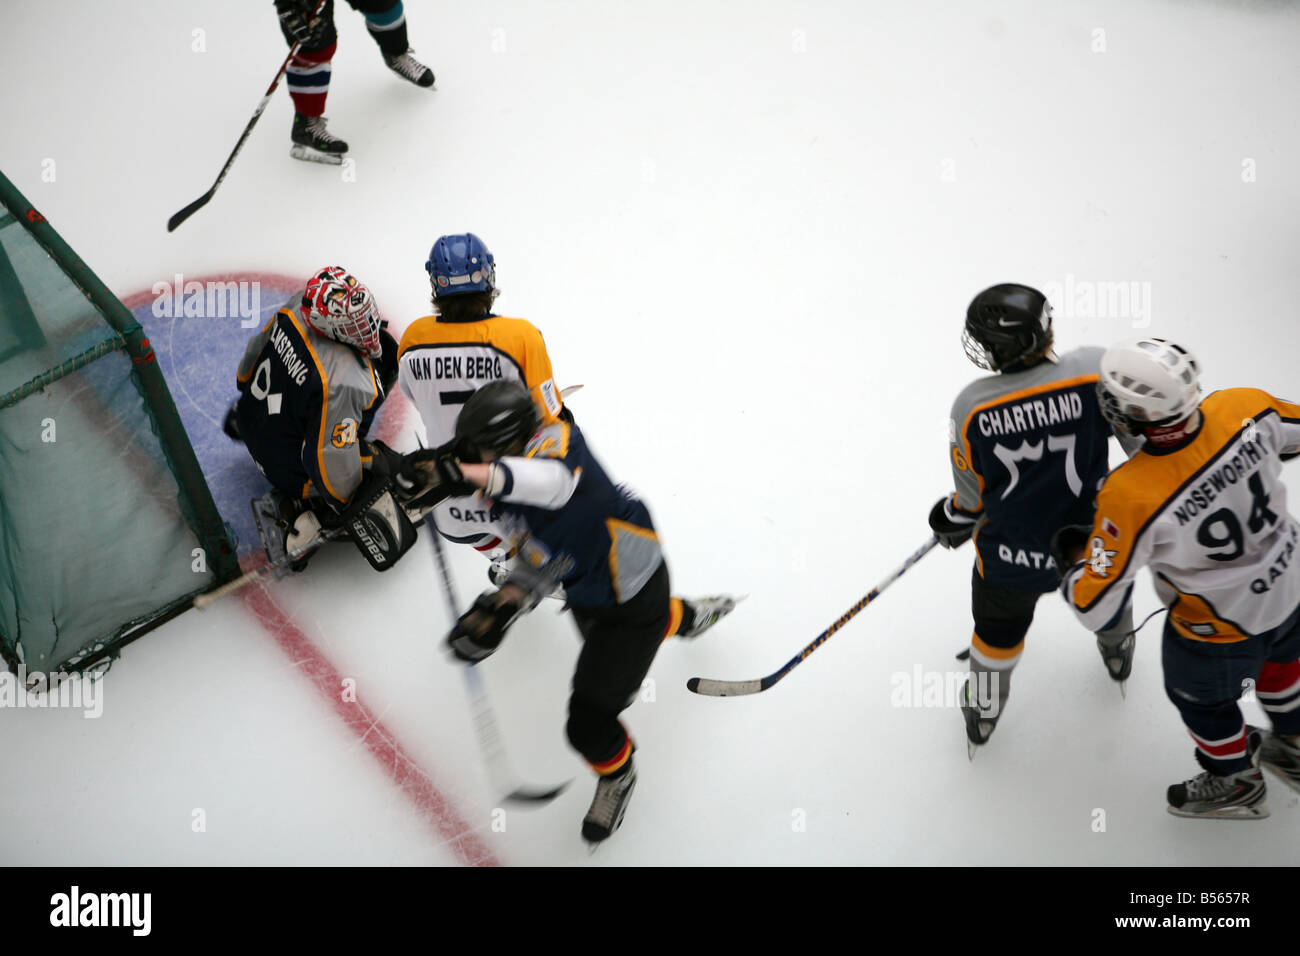 An ice hockey game in action at the City Center shopping mall in Doha Qatar Arabia Stock Photo